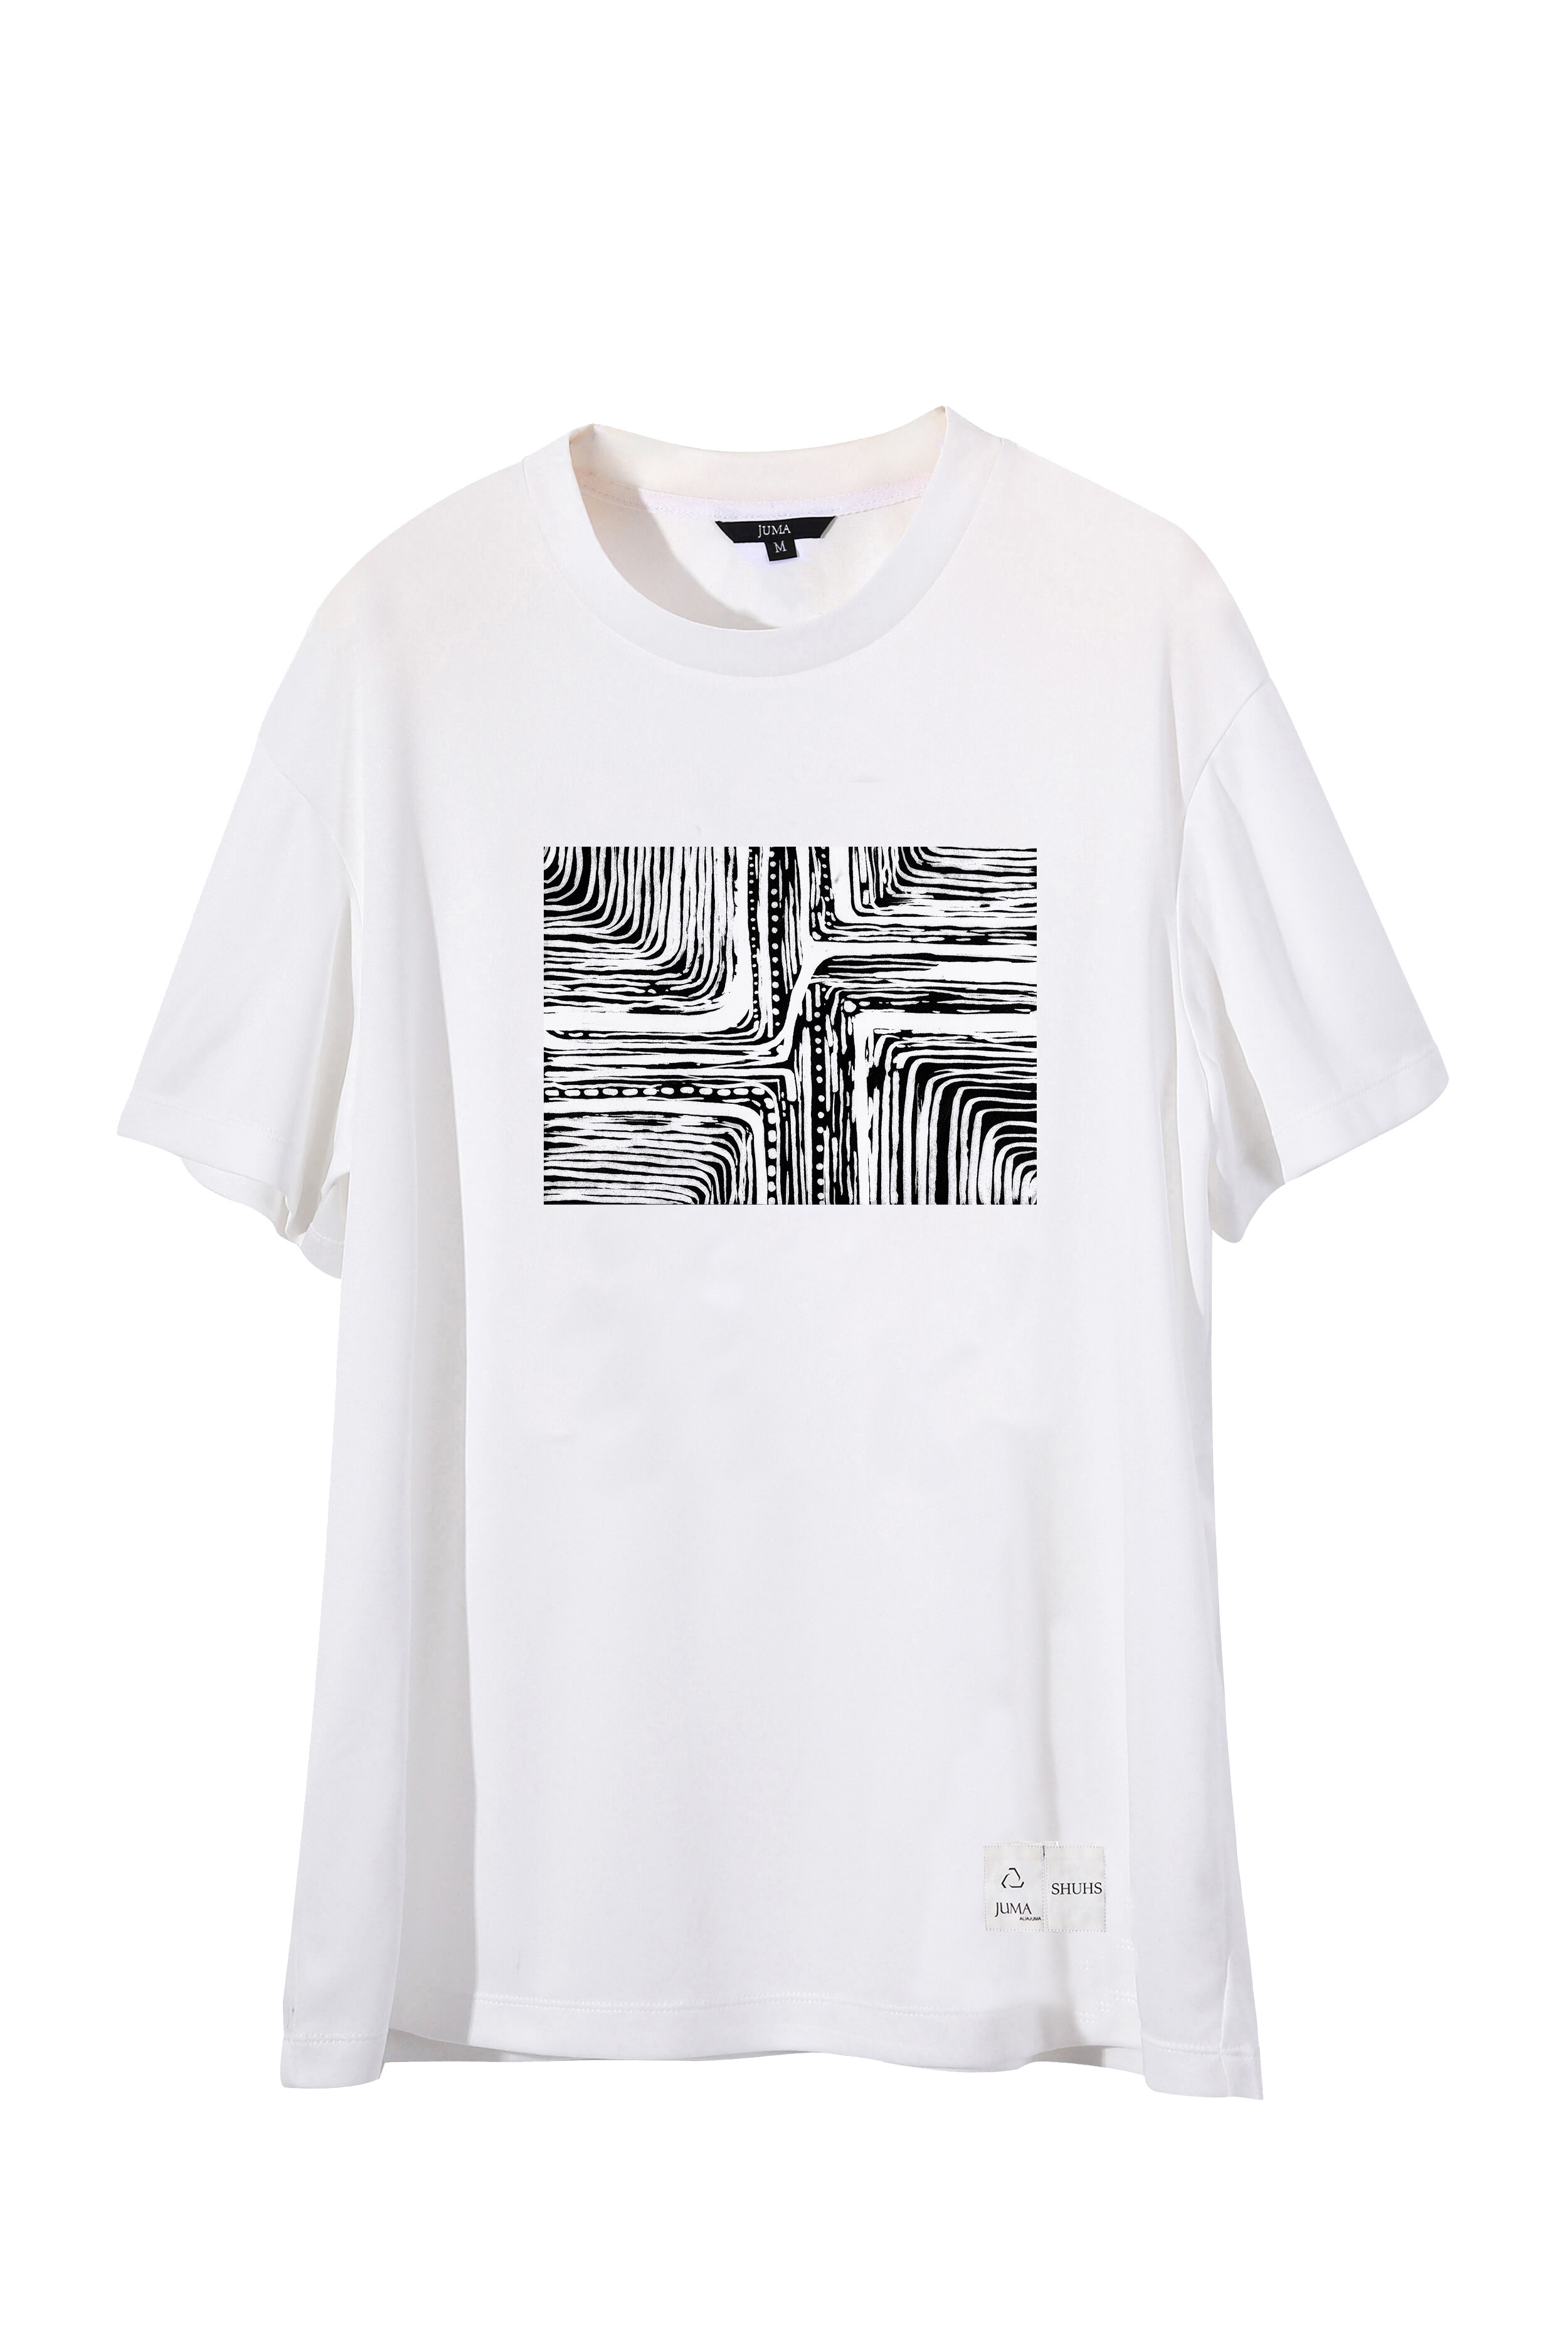 Recharge 印花 1 件 T 恤 - 4 个再生水瓶 - 黑色｜Recharge Print 1 T-Shirt - 4 Recycled Water Bottles-Black